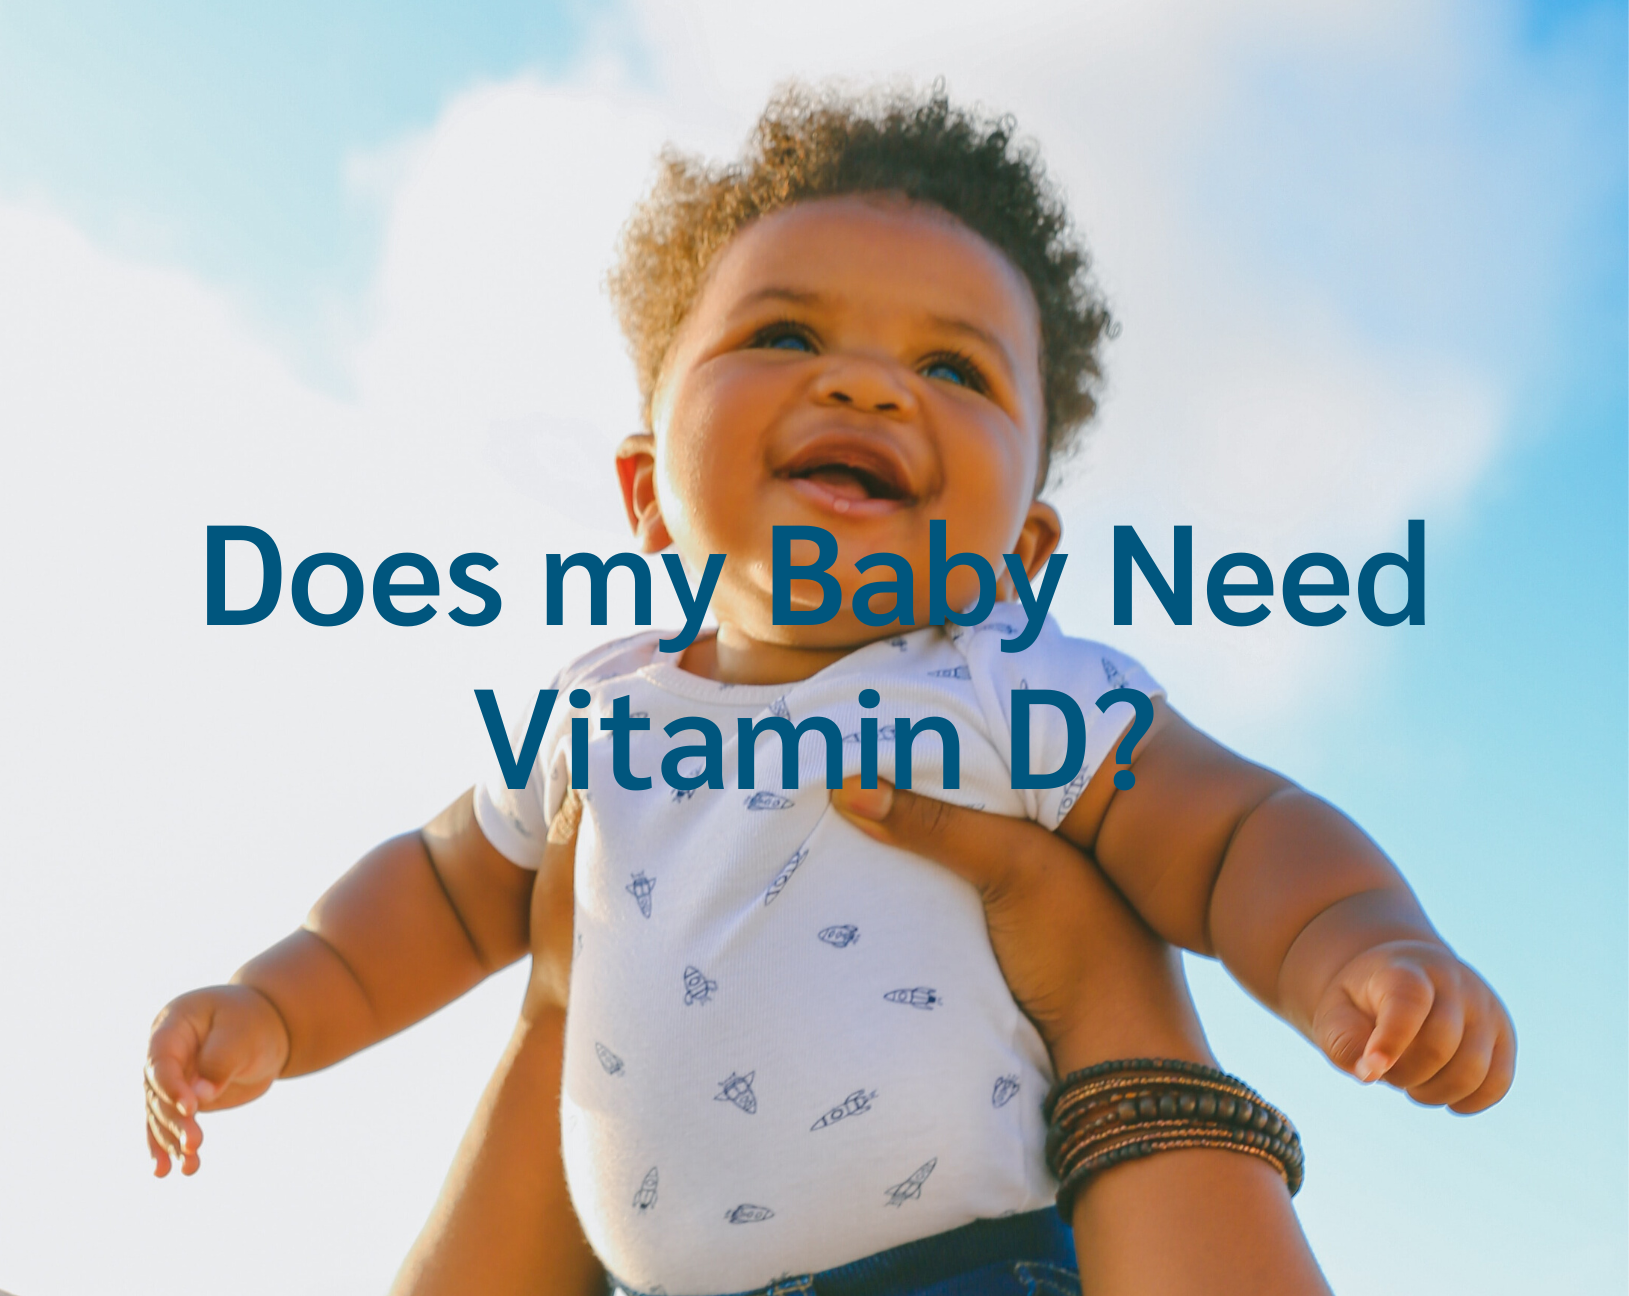 does baby need vitamin d supplement?